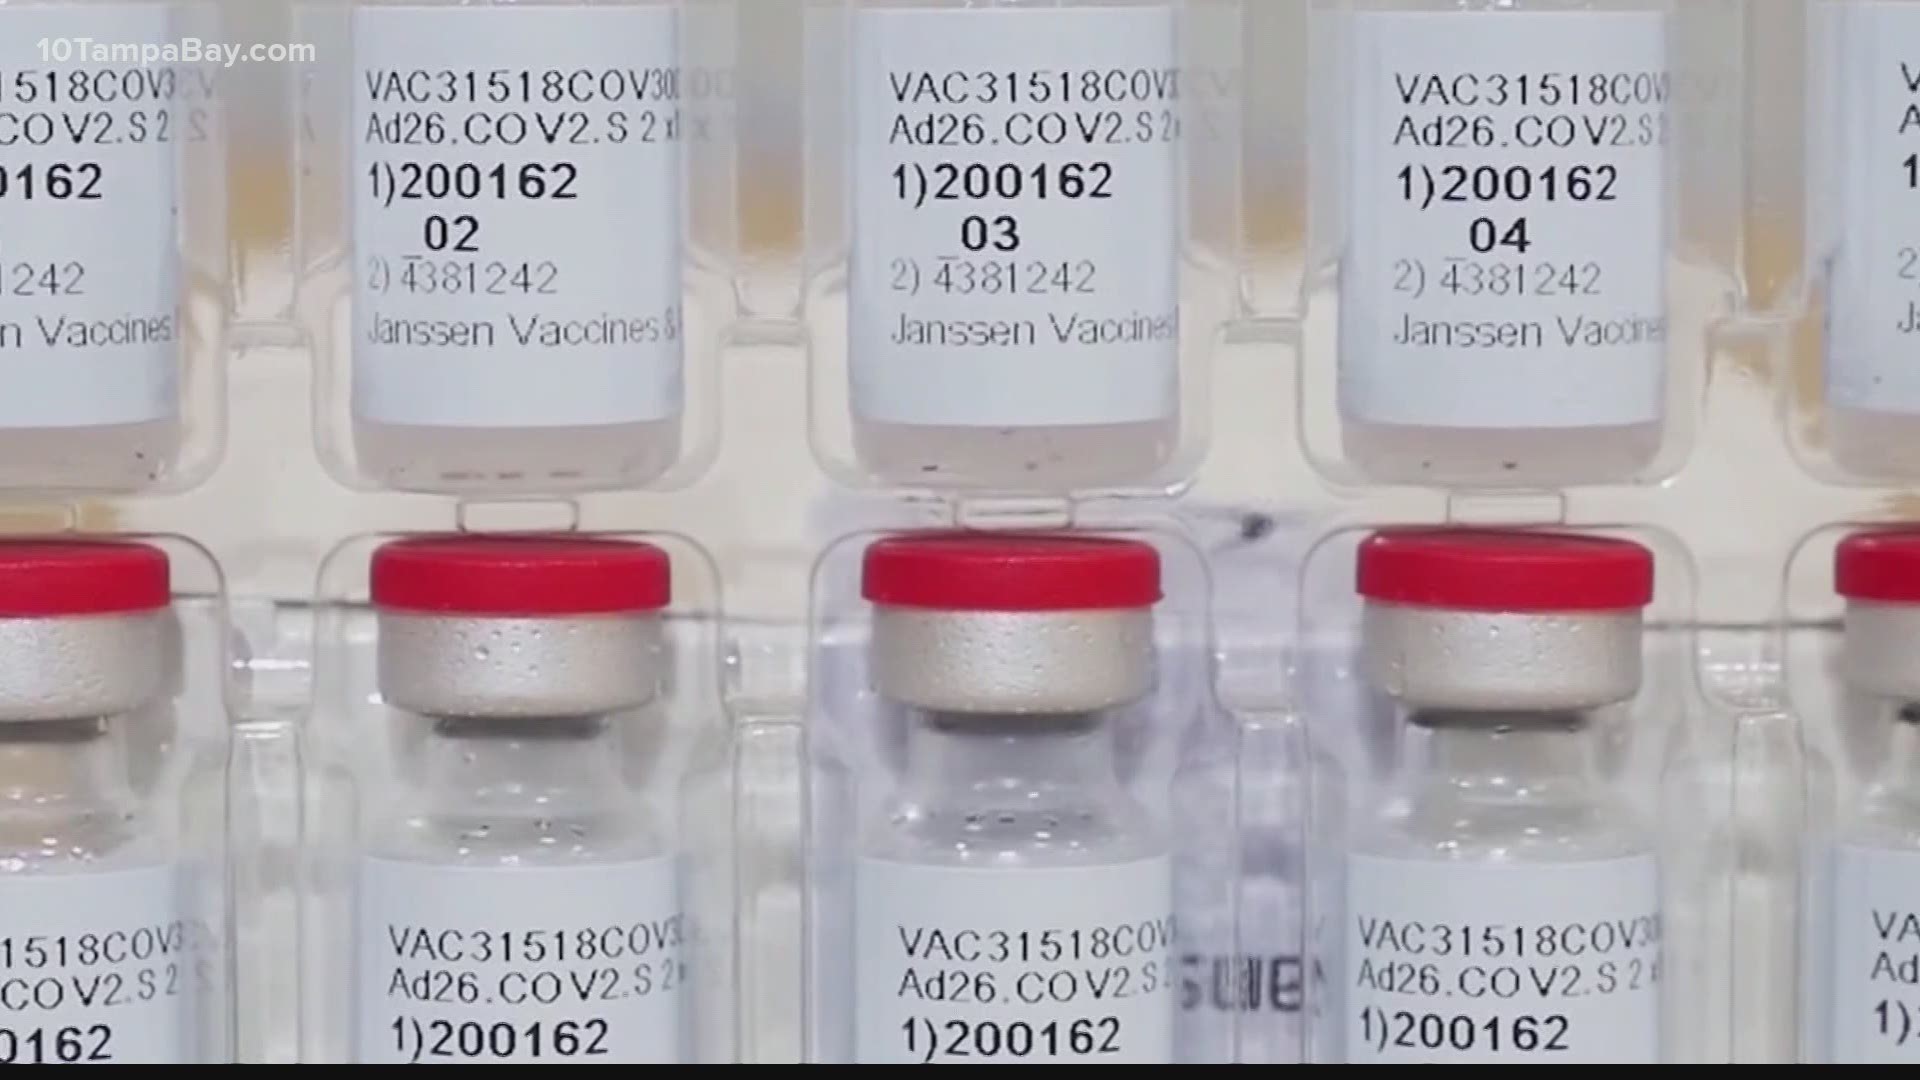 Scientists say the Johnson & Johnson vaccine is up to par with Moderna and Pfizer. Anyone who's eligible should feel comfortable getting a dose no matter the brand.